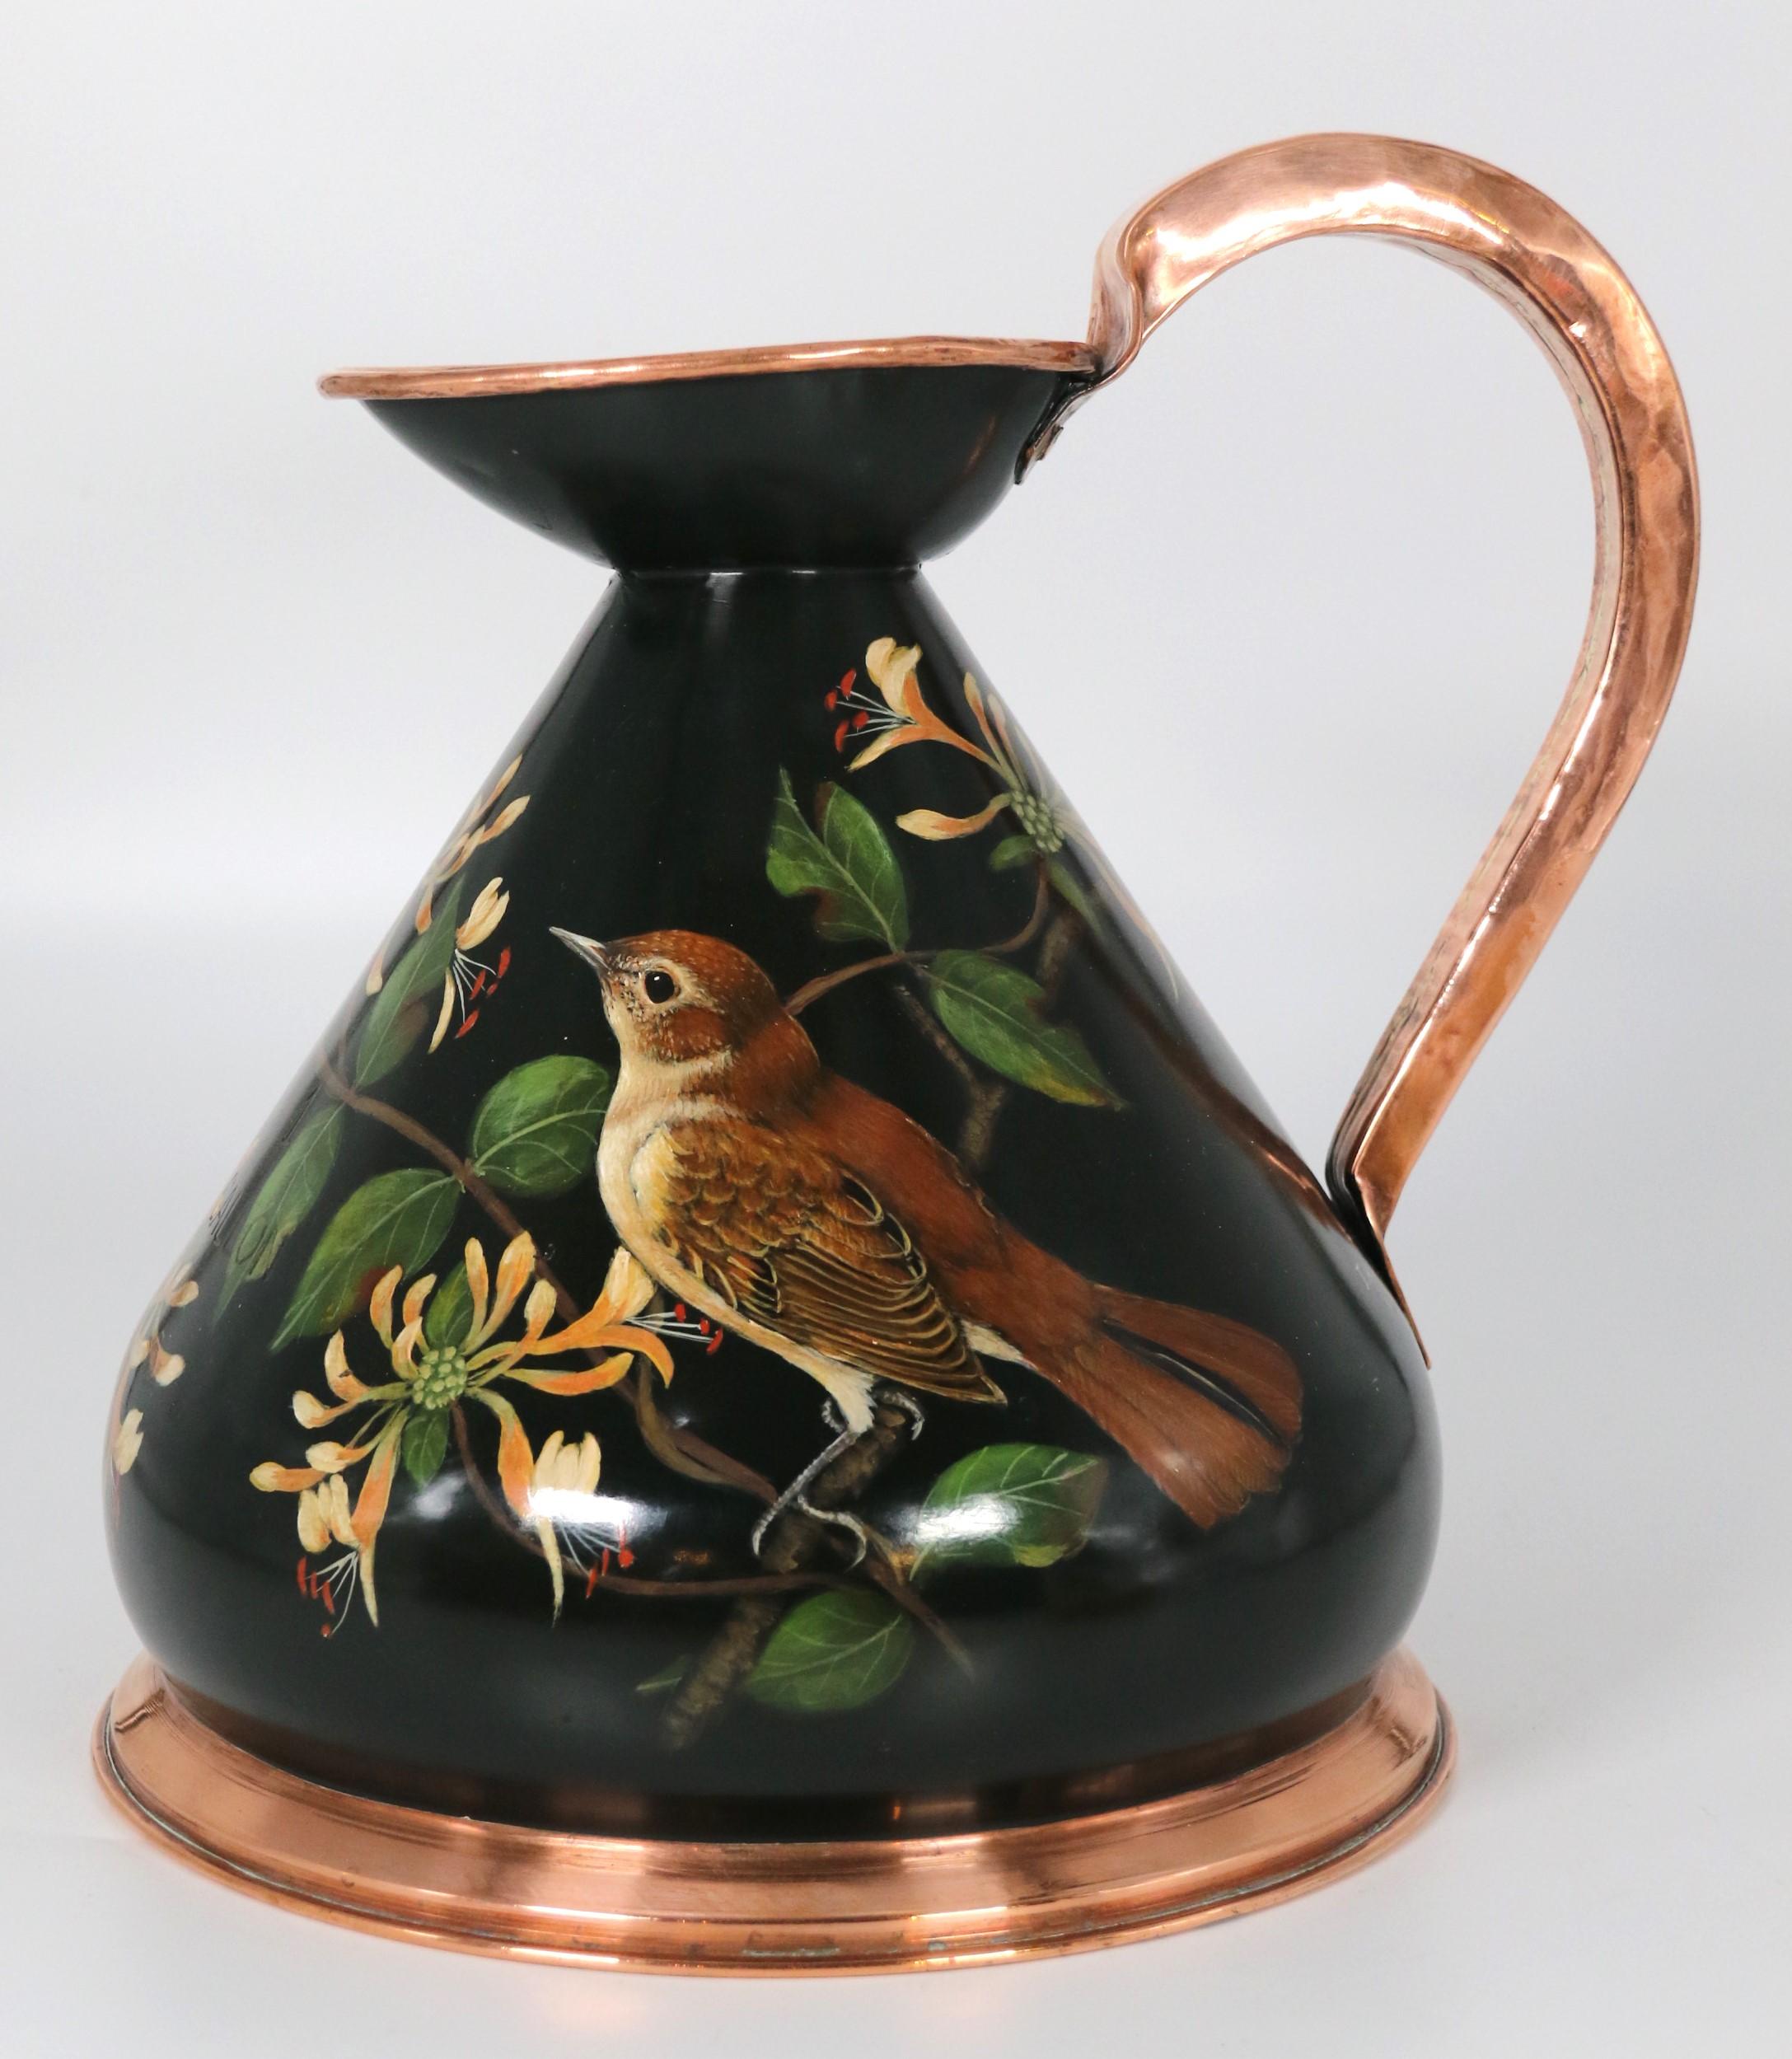 This most unusual and highly decorative English copper cider or ale jug holds a full gallon and is stamped with this measure on the front.
The jug also has a lead maker's seal on its rim.

The unique feature of this lovely heavy copper jug is the